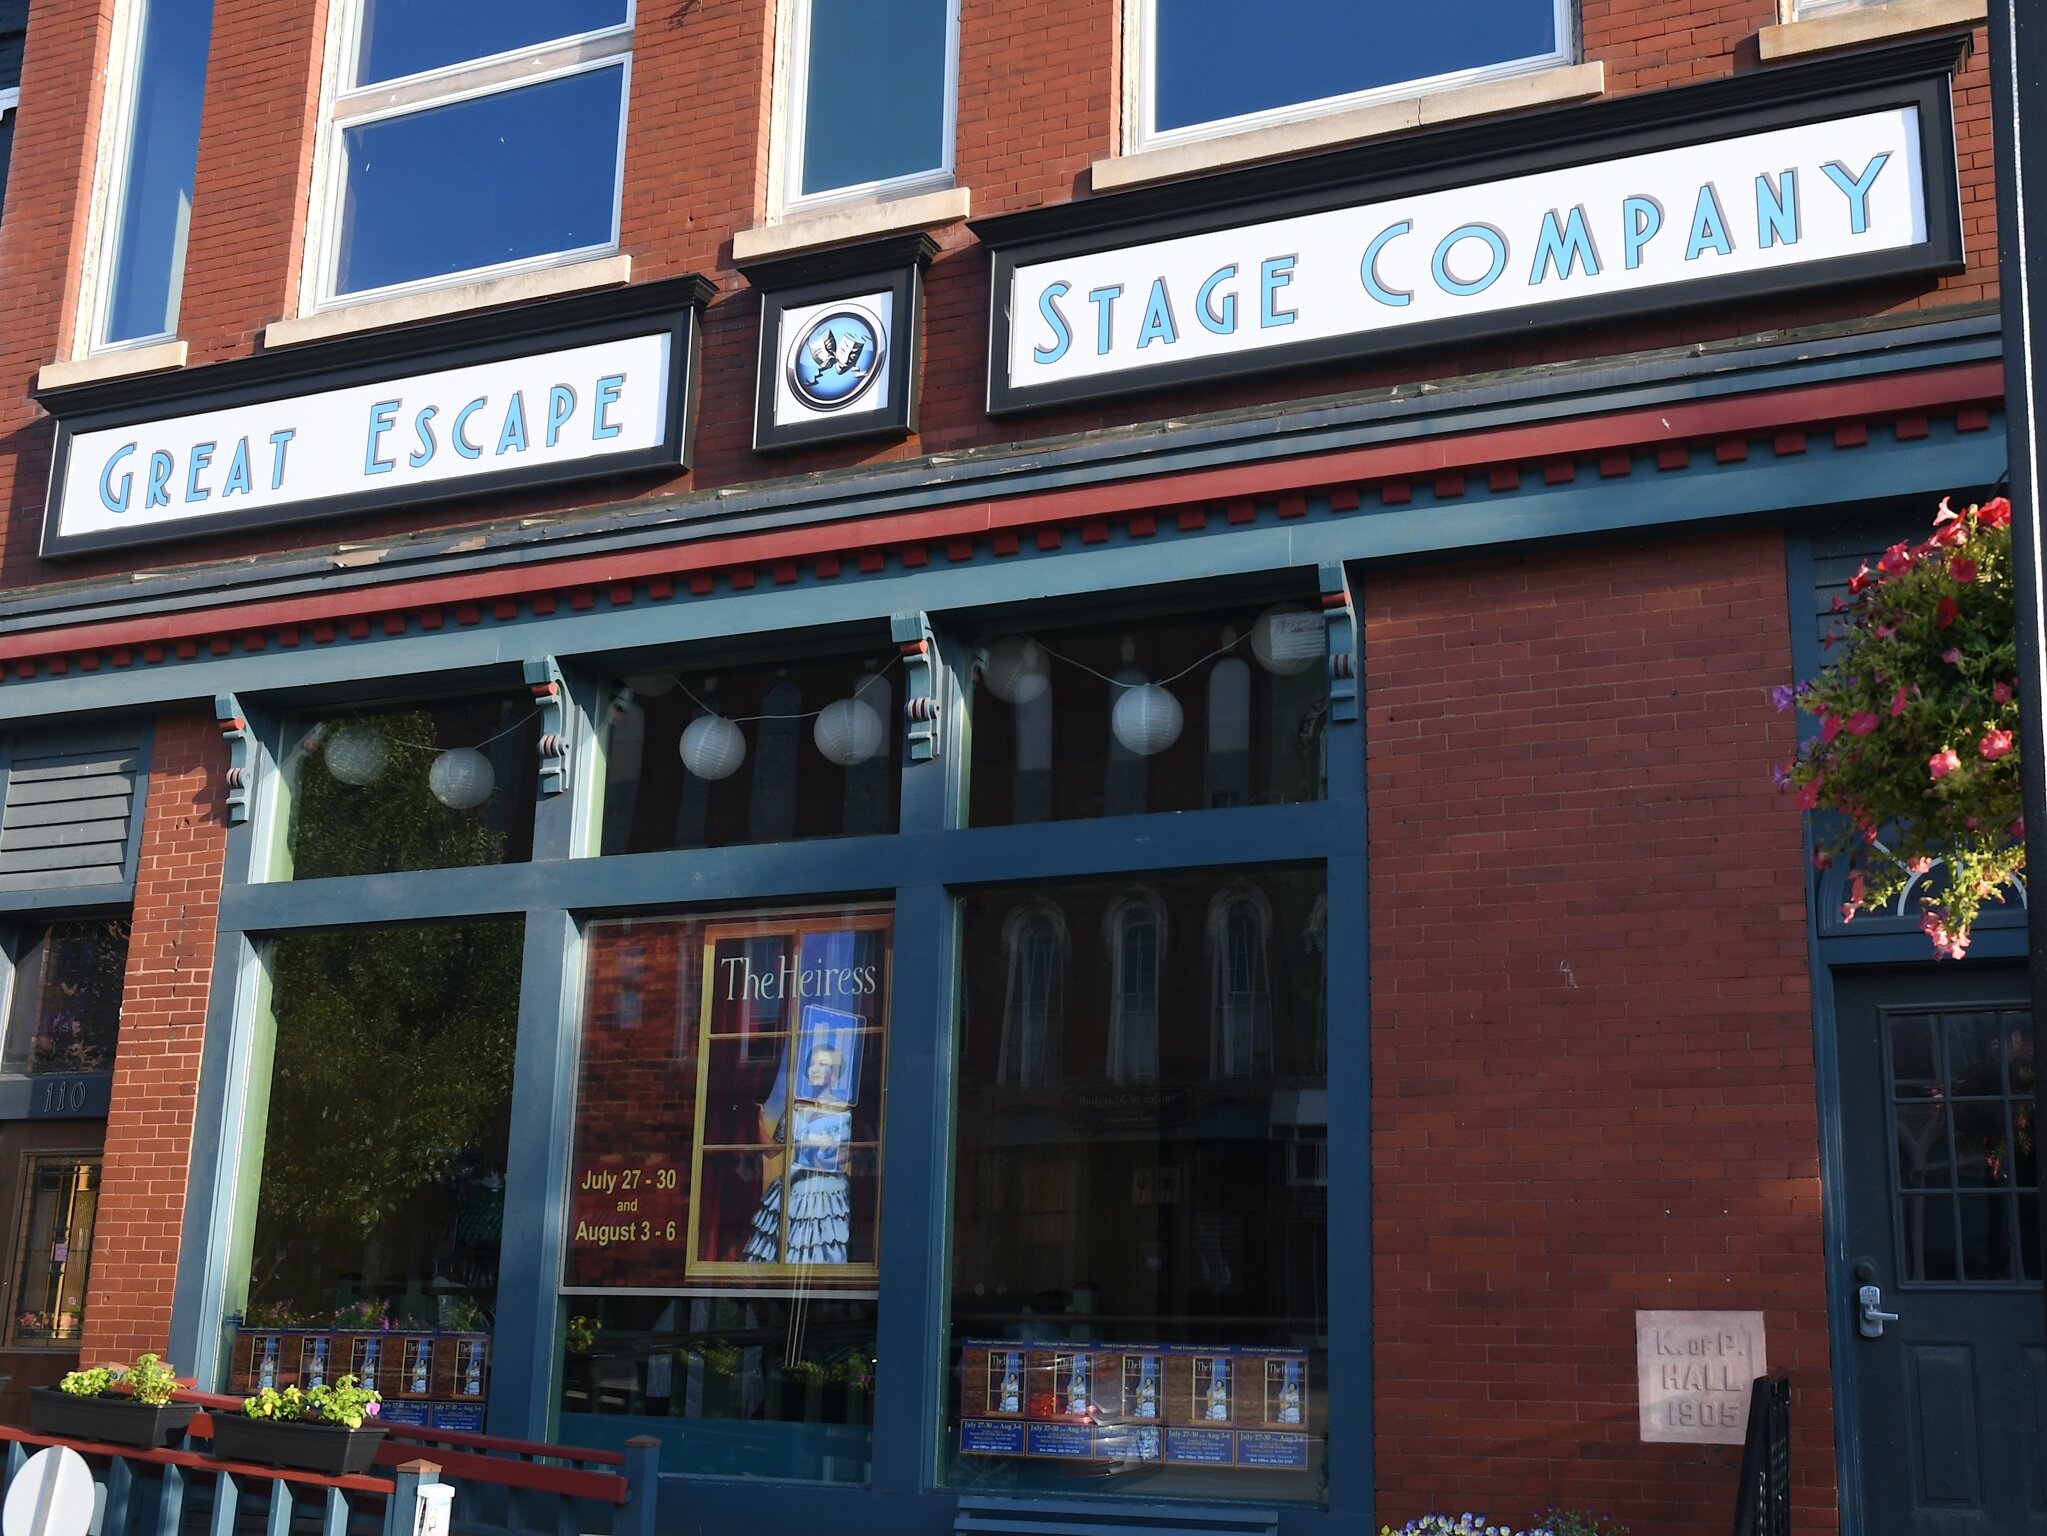 The Great Escape Stage Company is located in downtown Marshall.